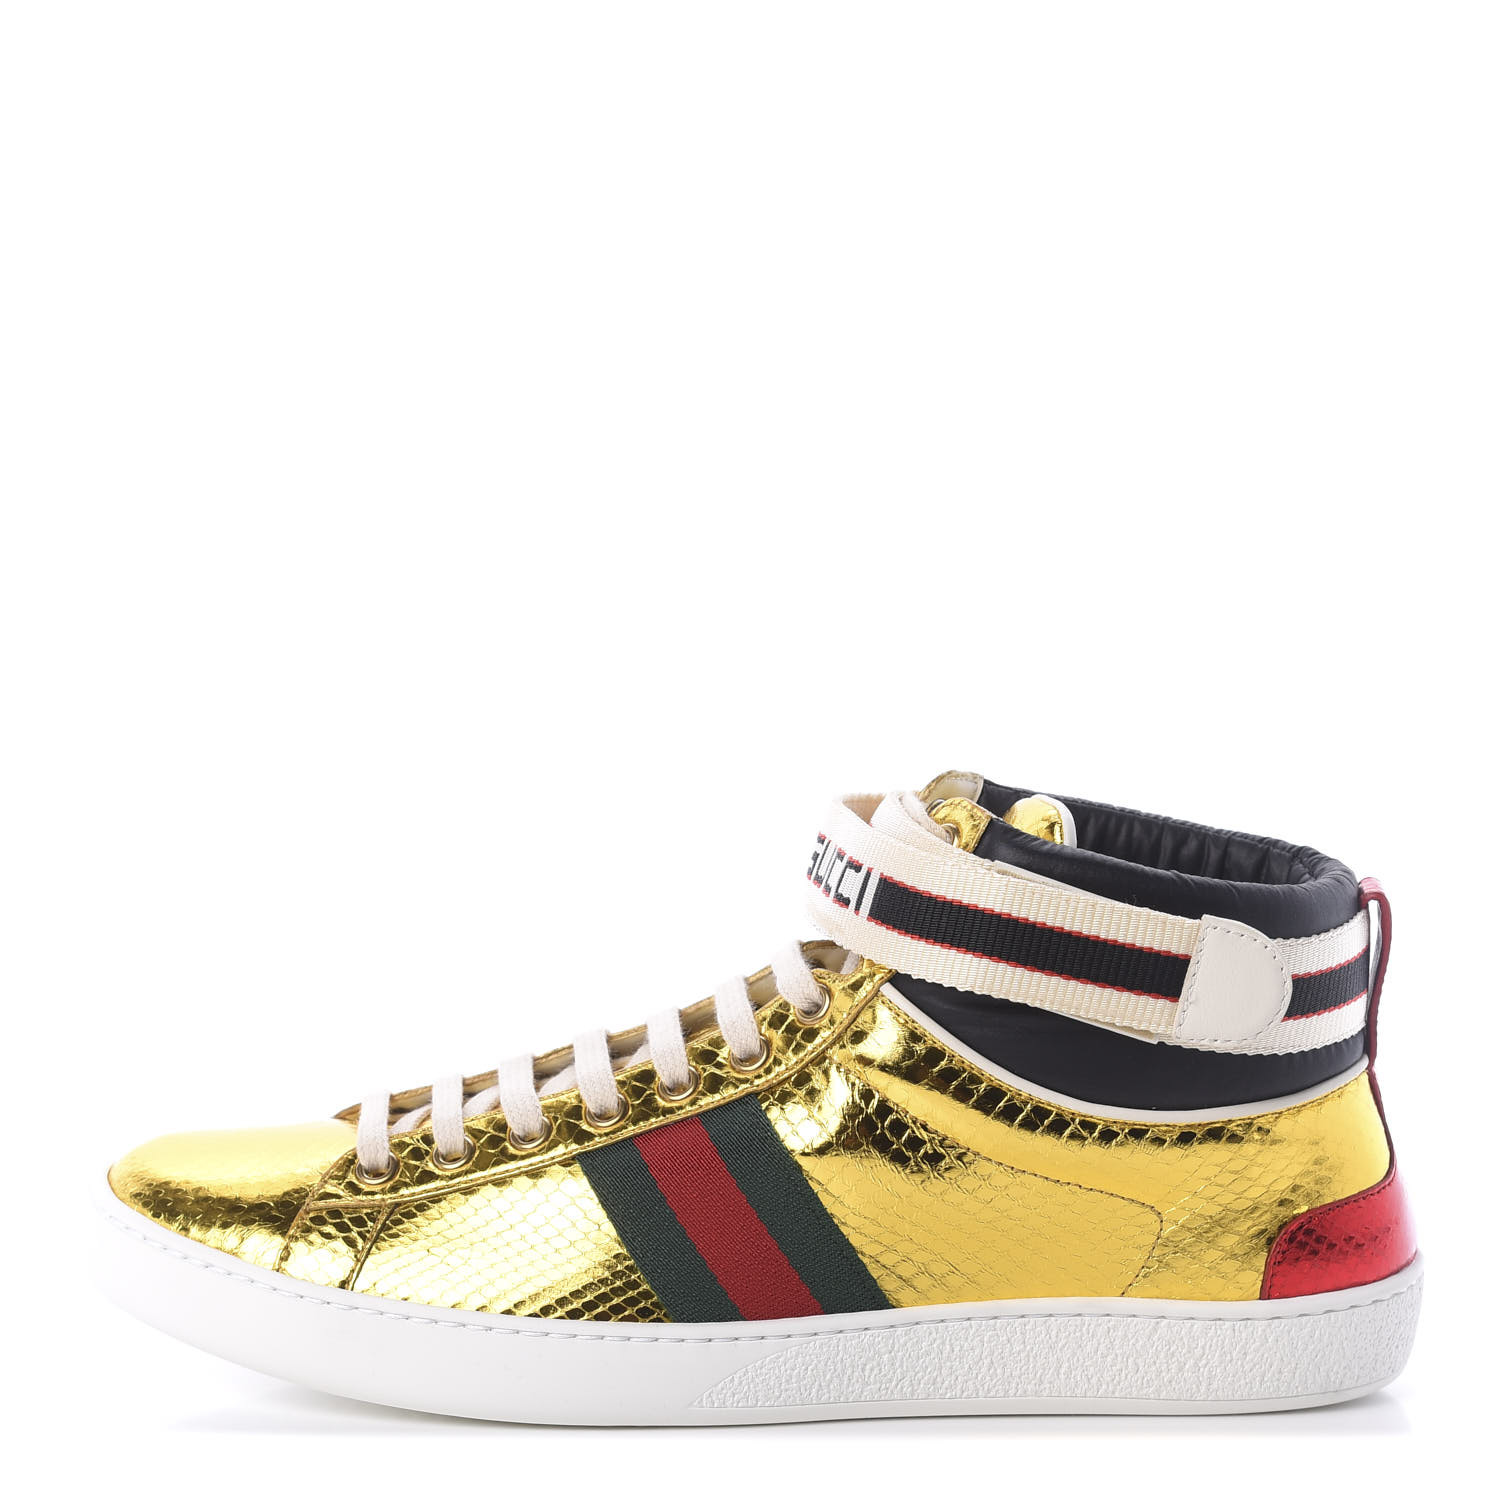 GUCCI Metallic Snakeskin Womens New Ace High Top Sneakers 41.5 Oro 614154